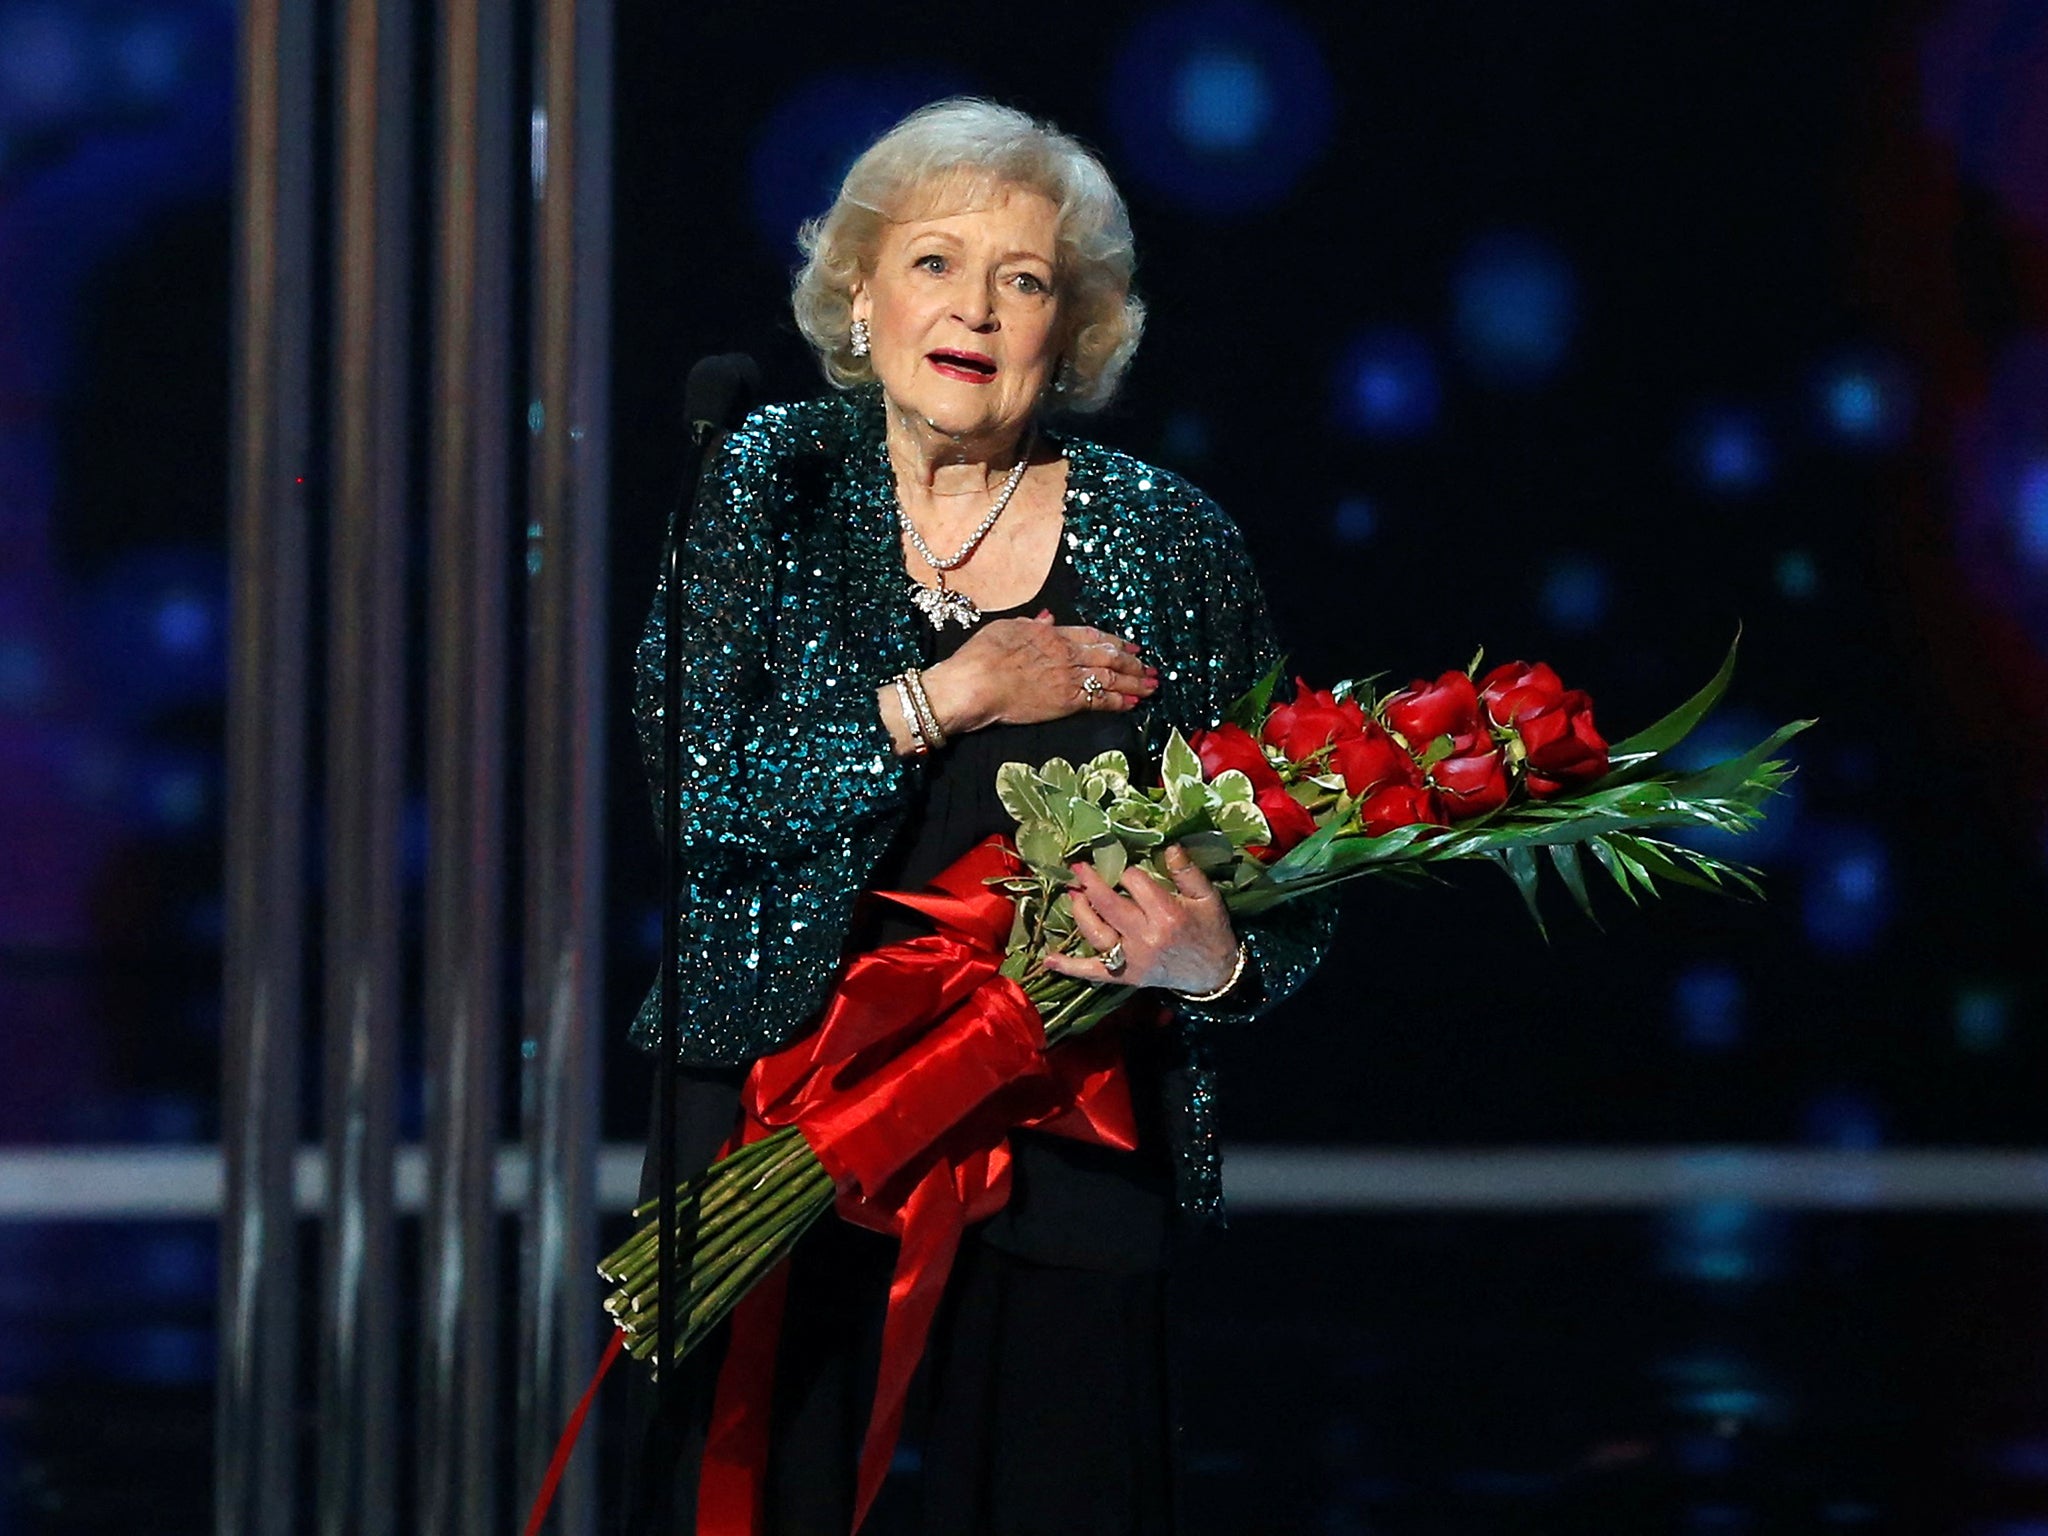 Accepting the TV Icon award at the People’s Choice Awards in 2015